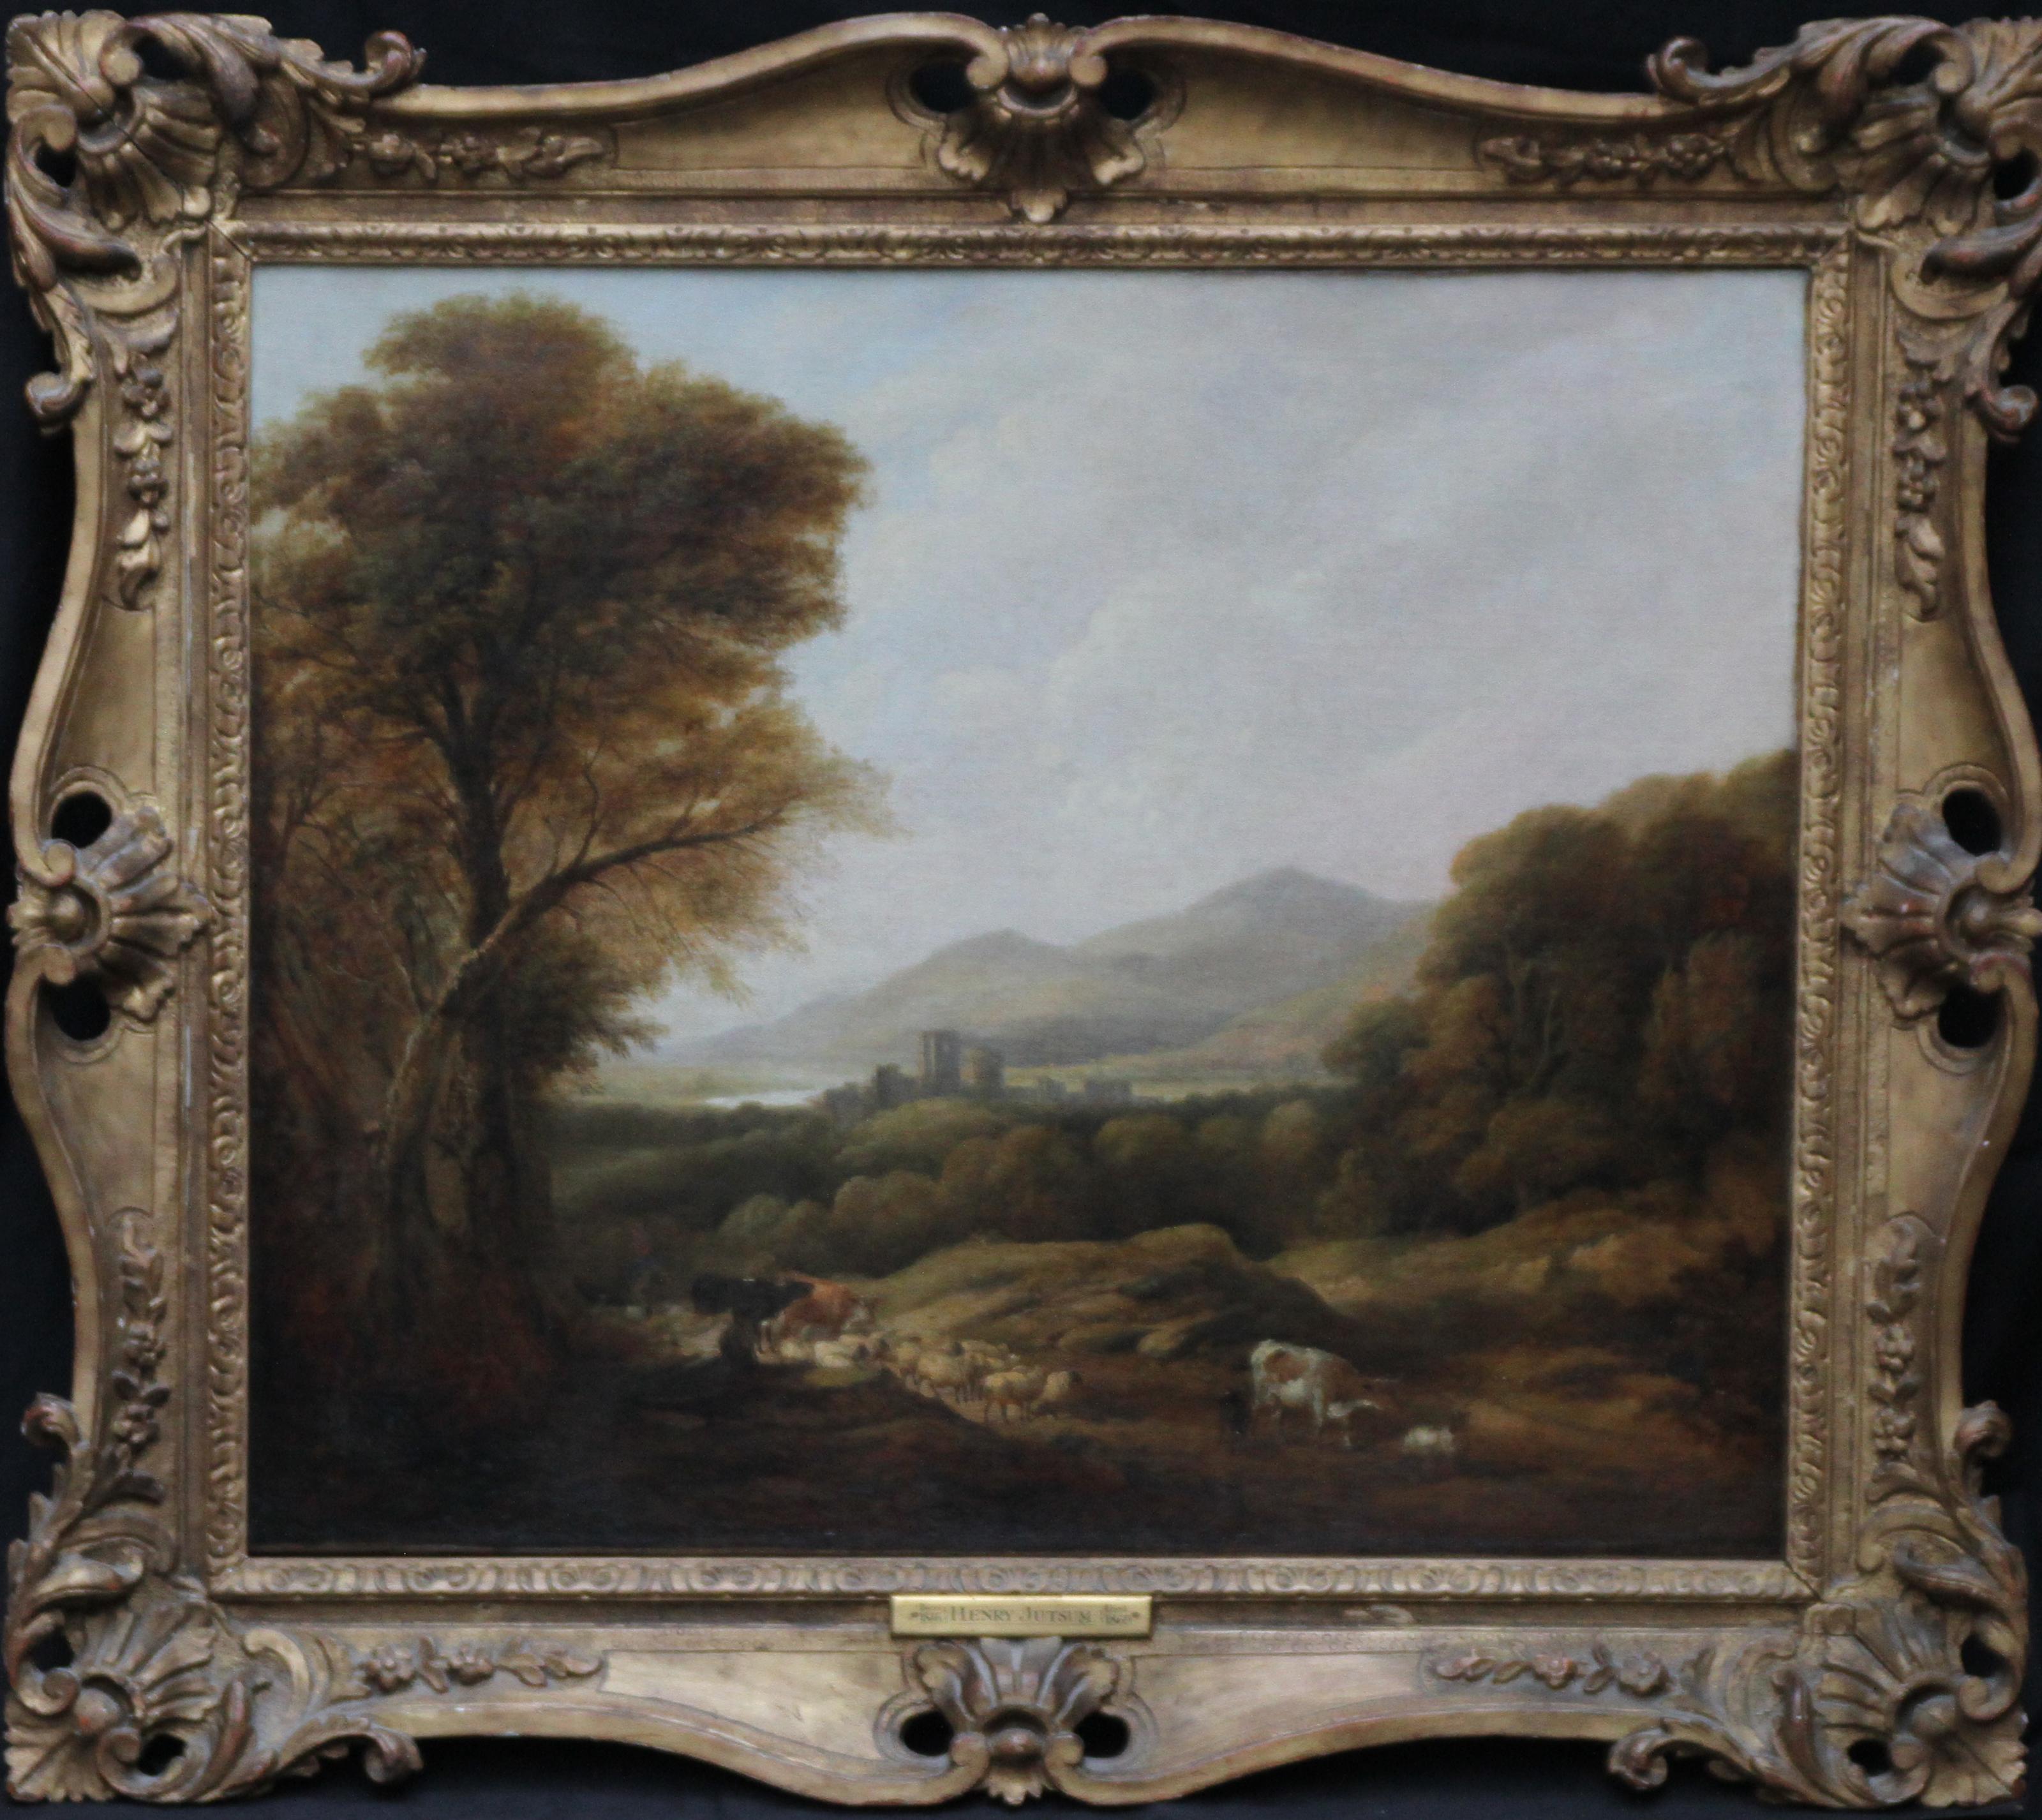 Cattle and Drover in a Landscape - British Victorian art landscape oil painting 5